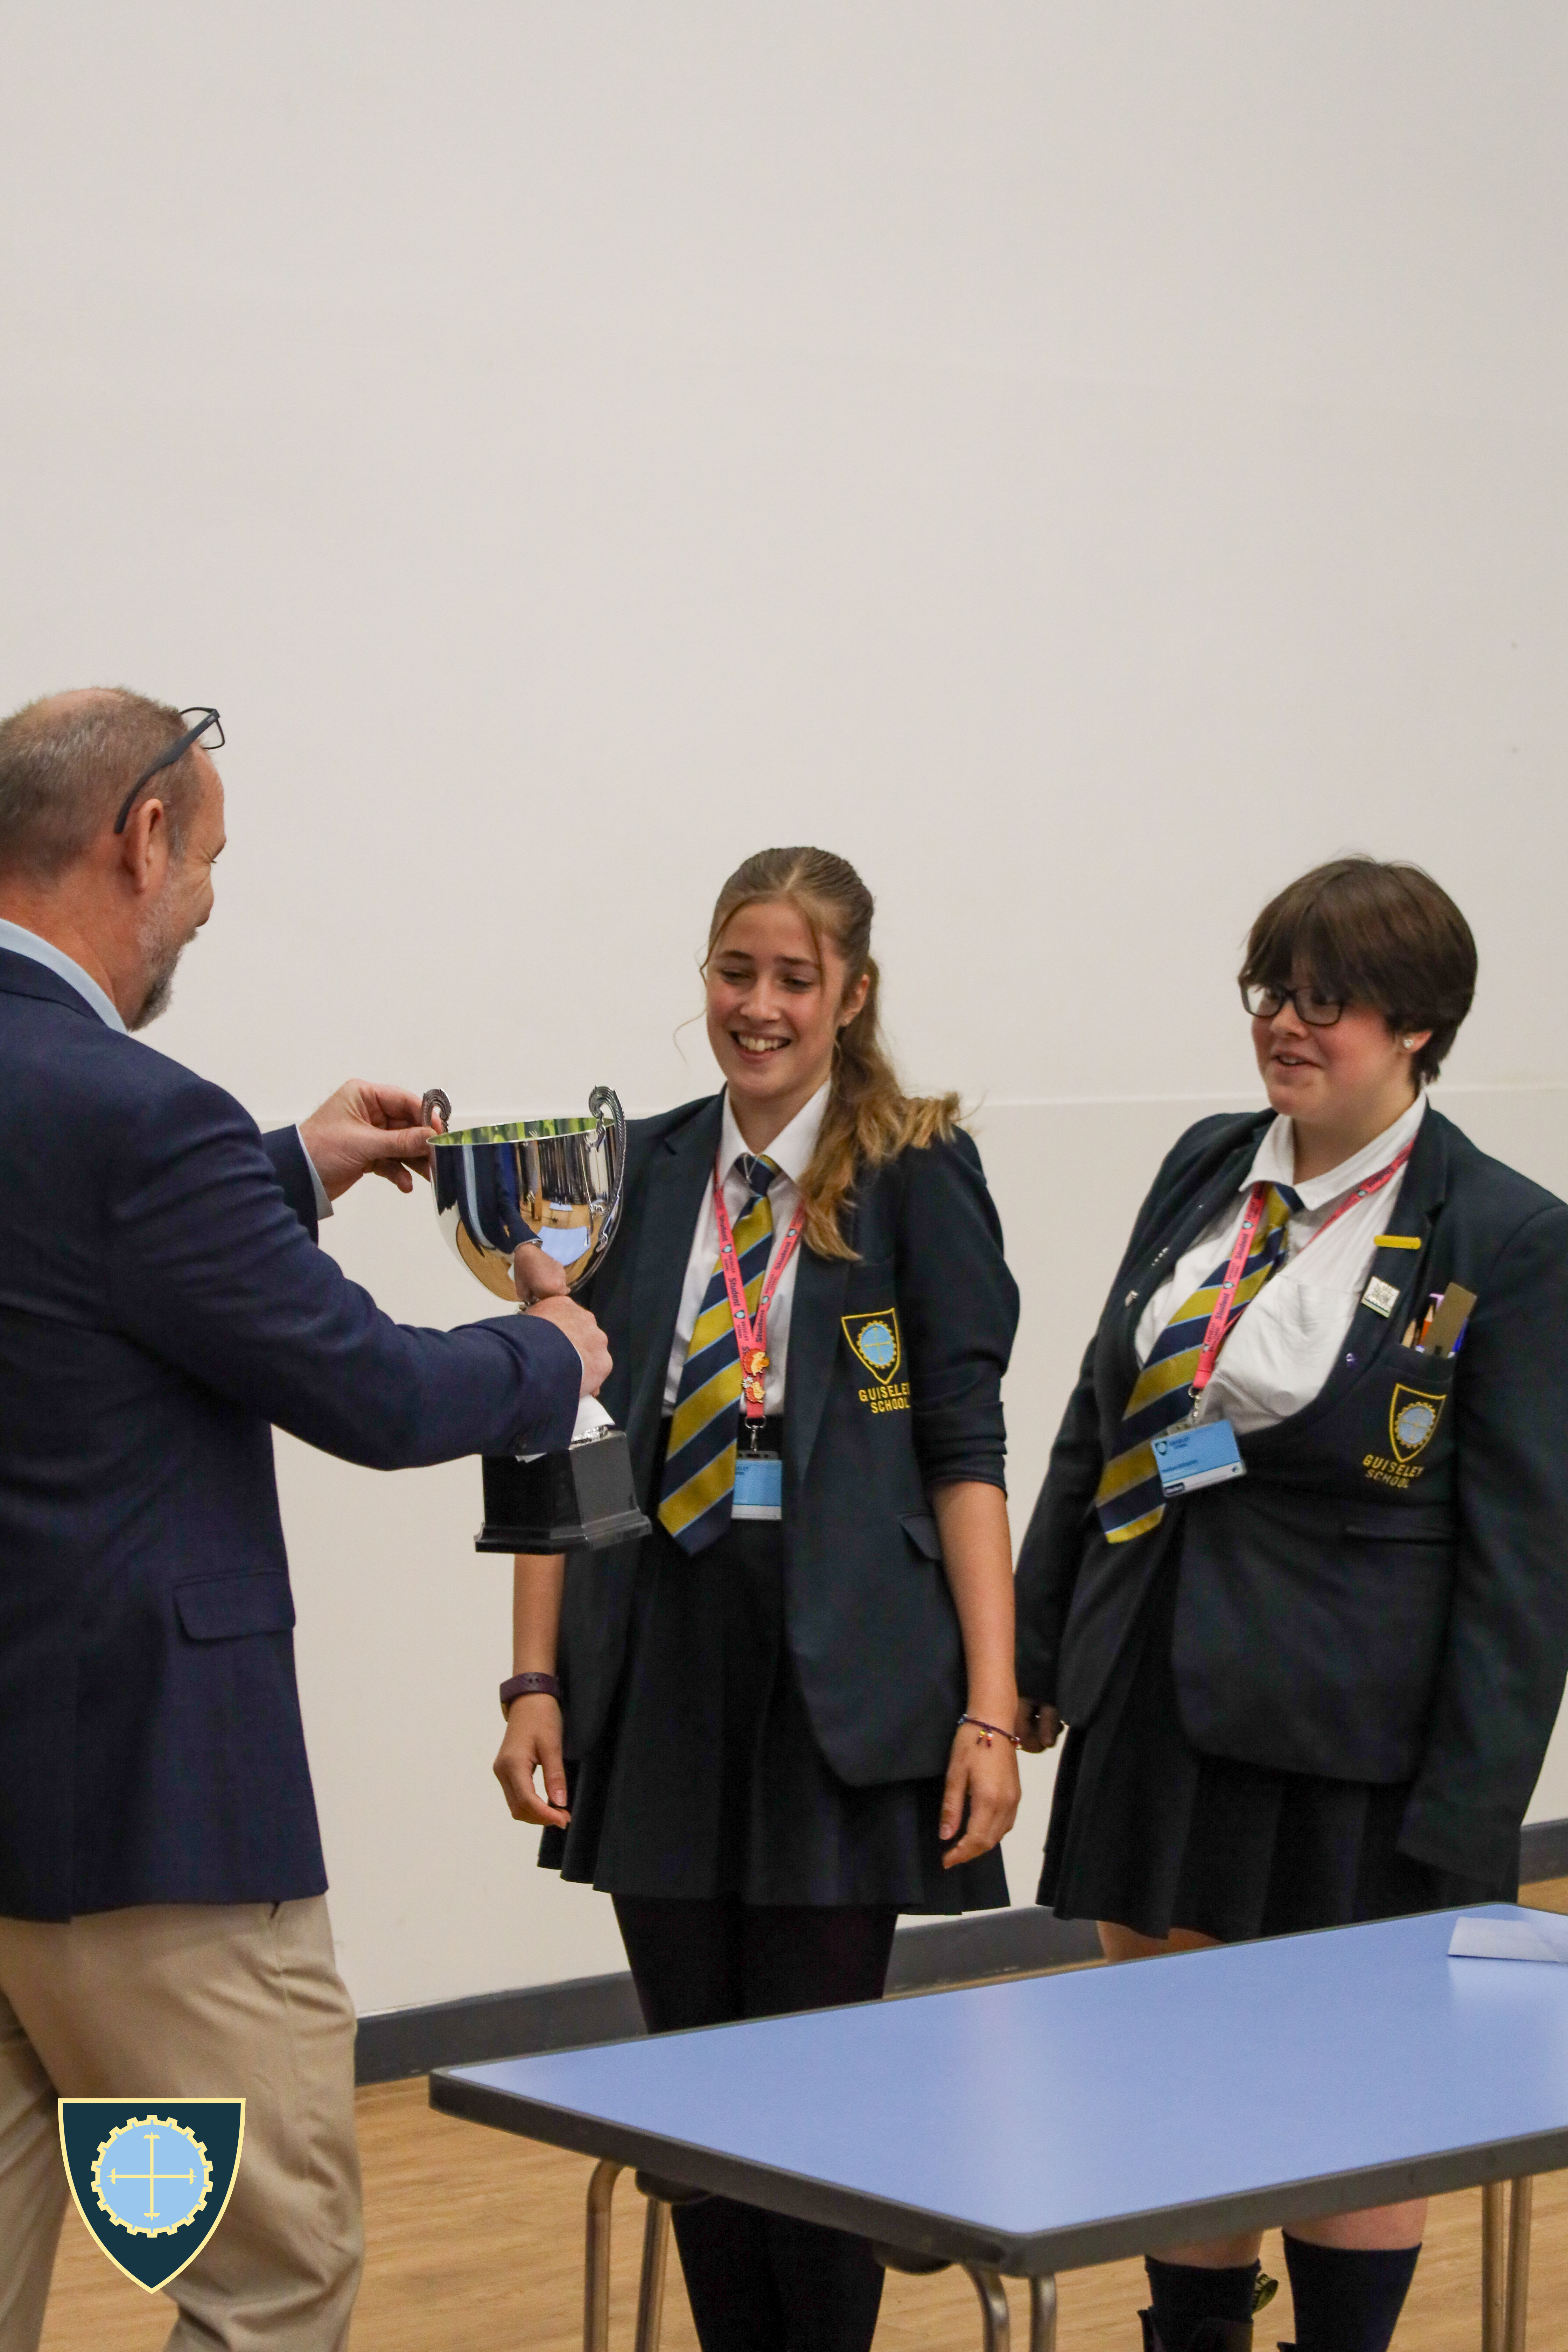 Last Years House Cup Winners, Omega, being awarded their trophy by Mr Clayton